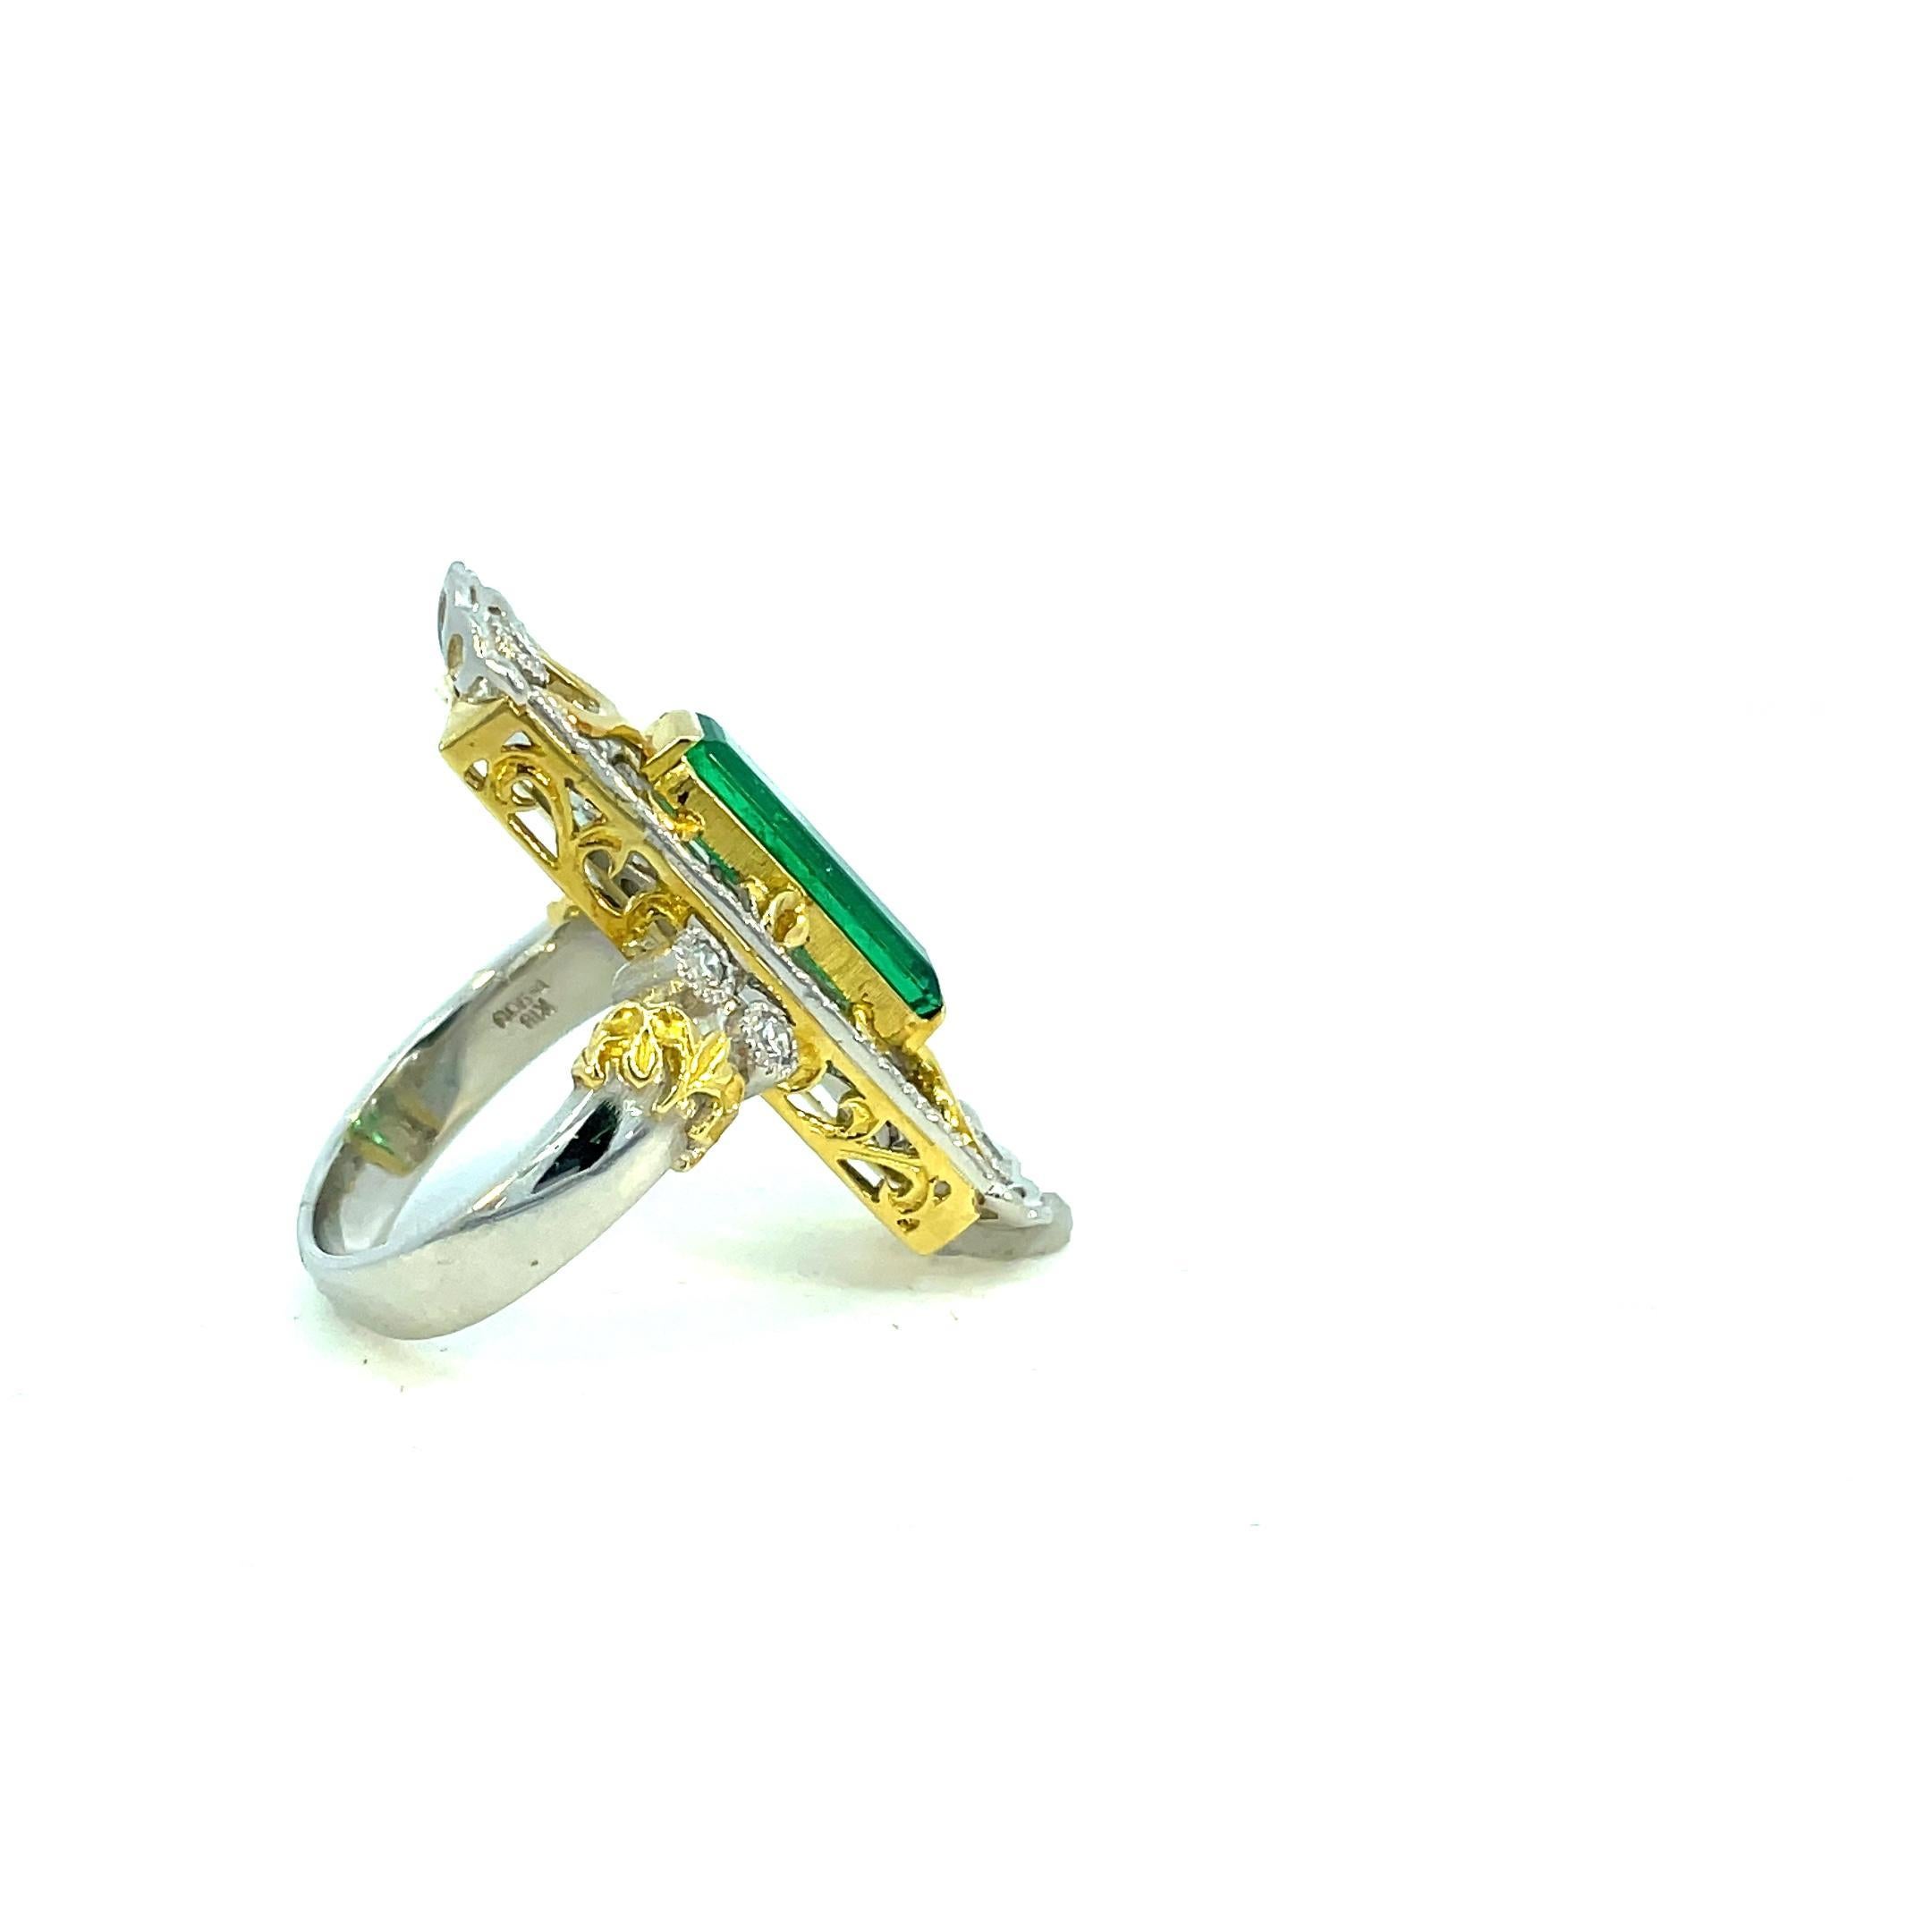 2.34 Carat Emerald Diamond Platinum Ring In Good Condition For Sale In New York, NY